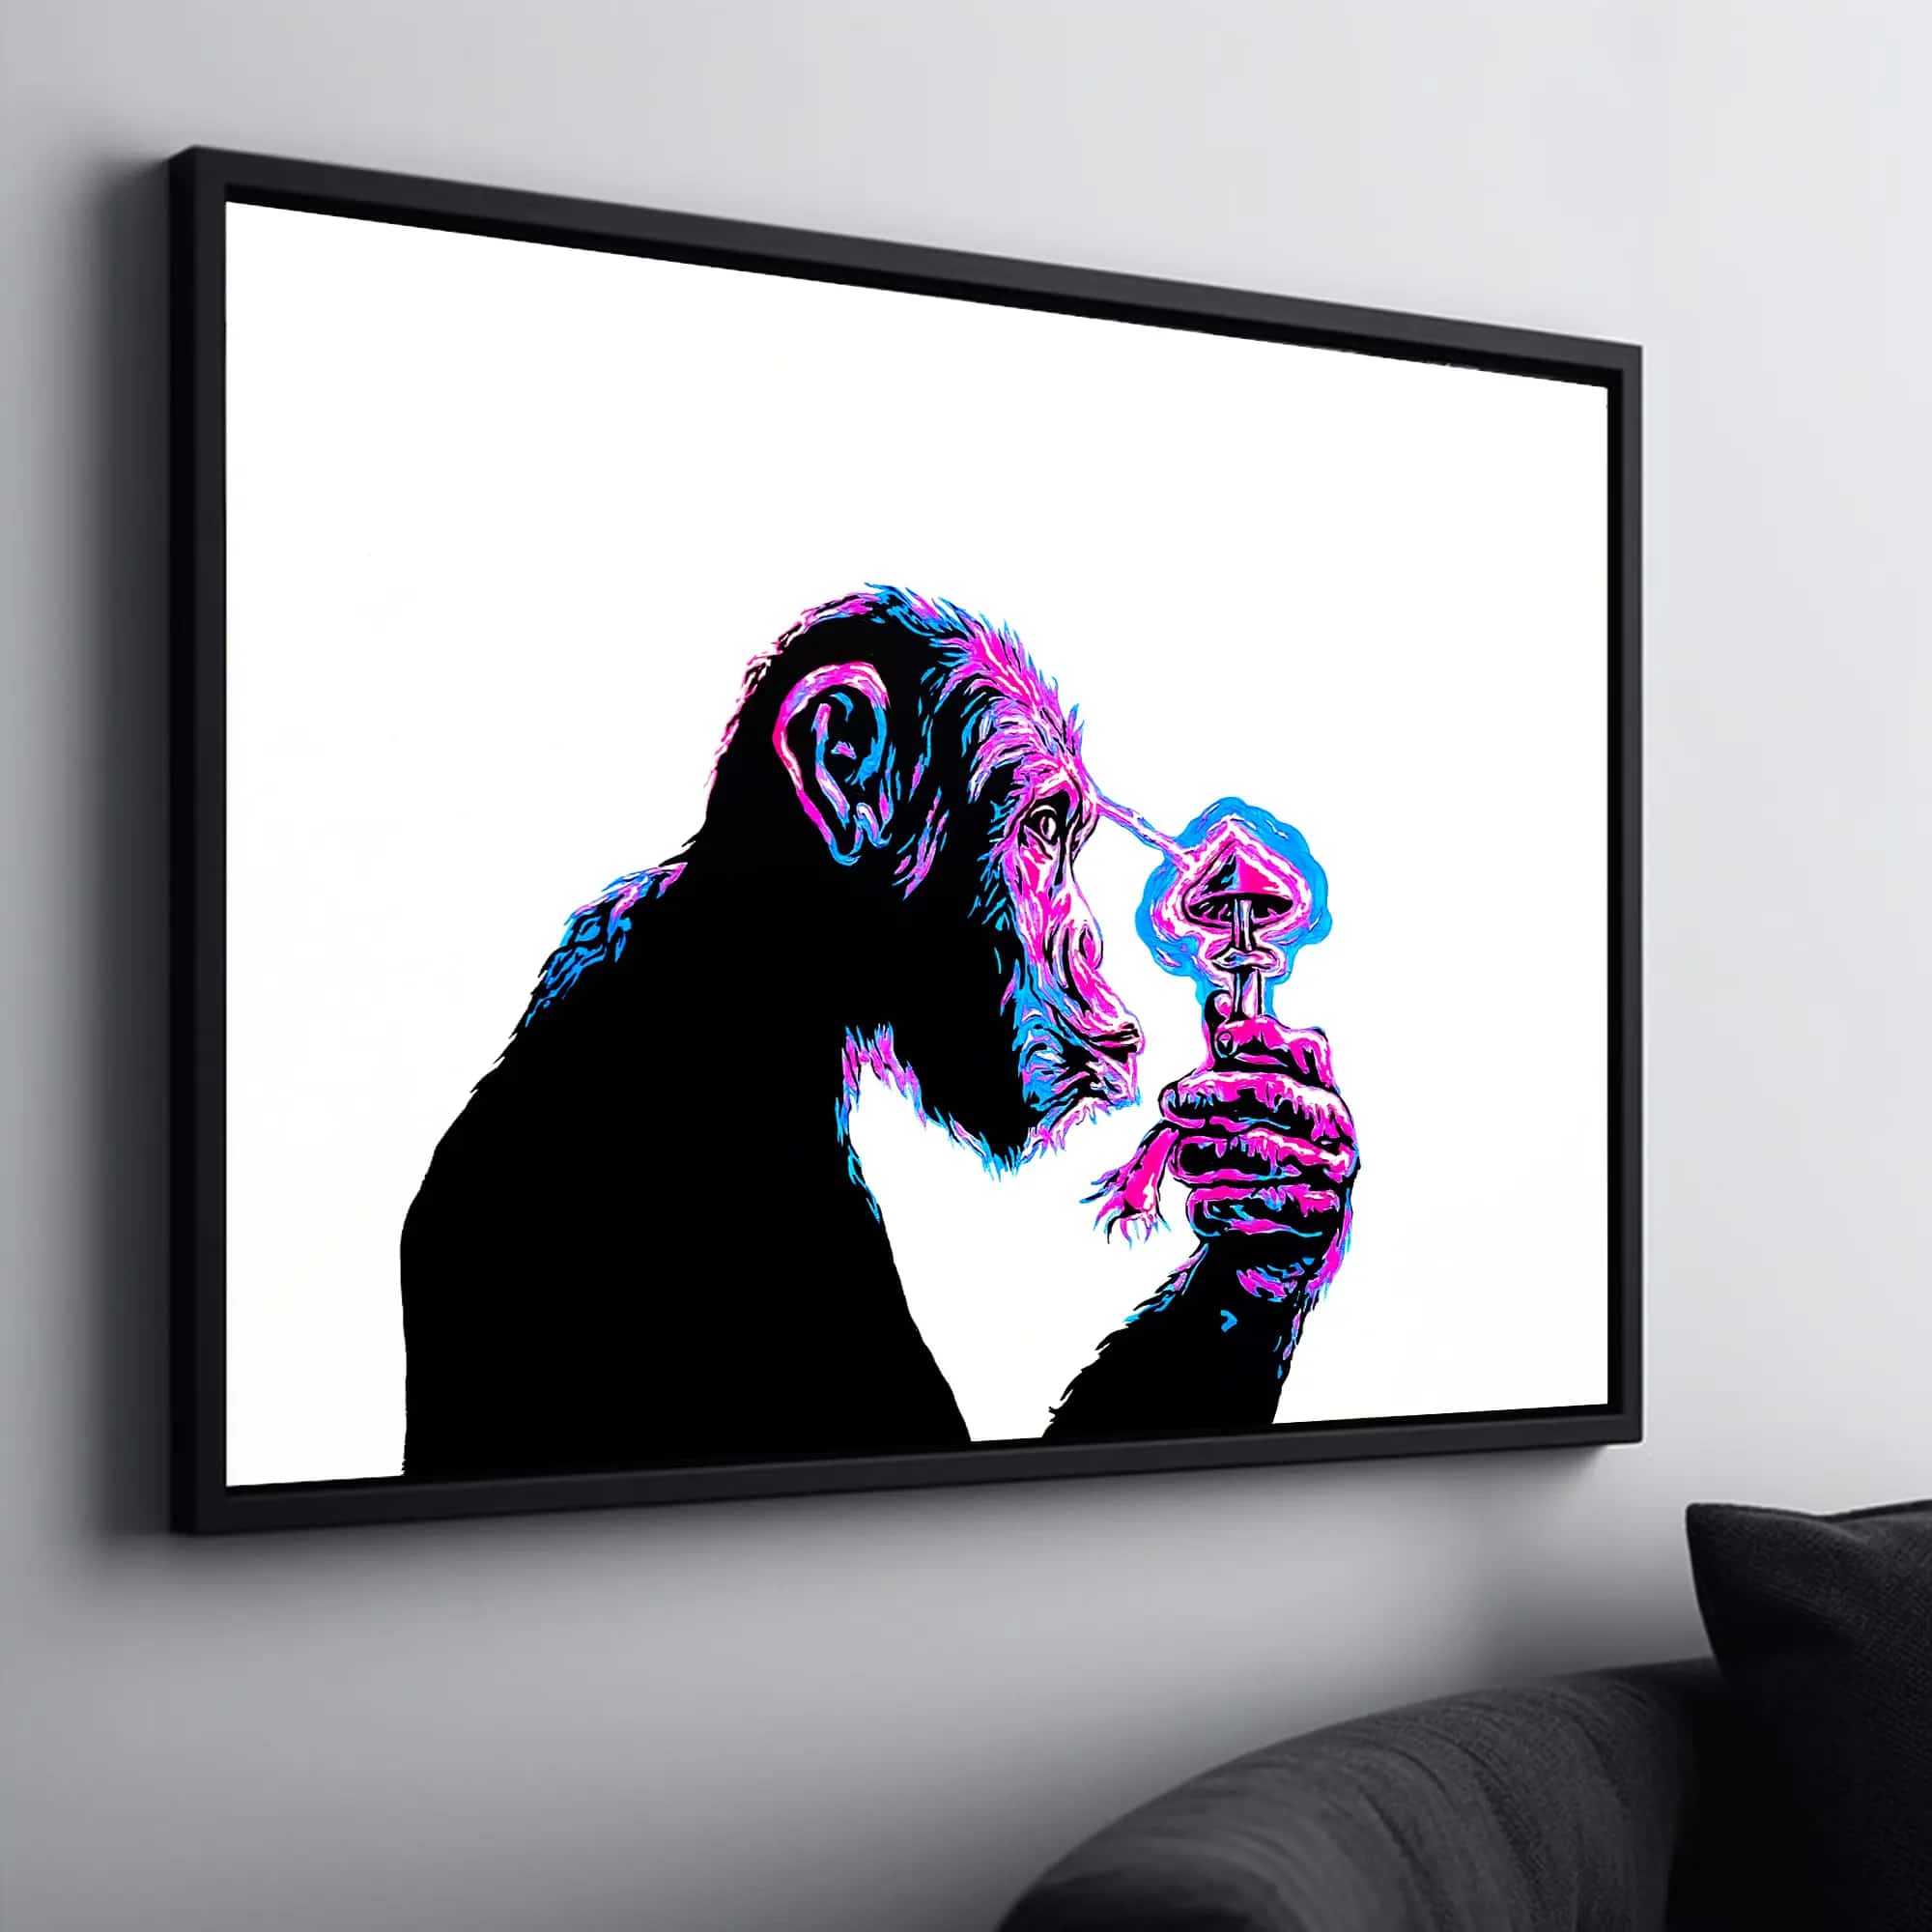 50x70cm Canvas Wall Art - Stoned Ape portrait, vibrant colors for daytime appreciation, with a hidden glow in the dark element.